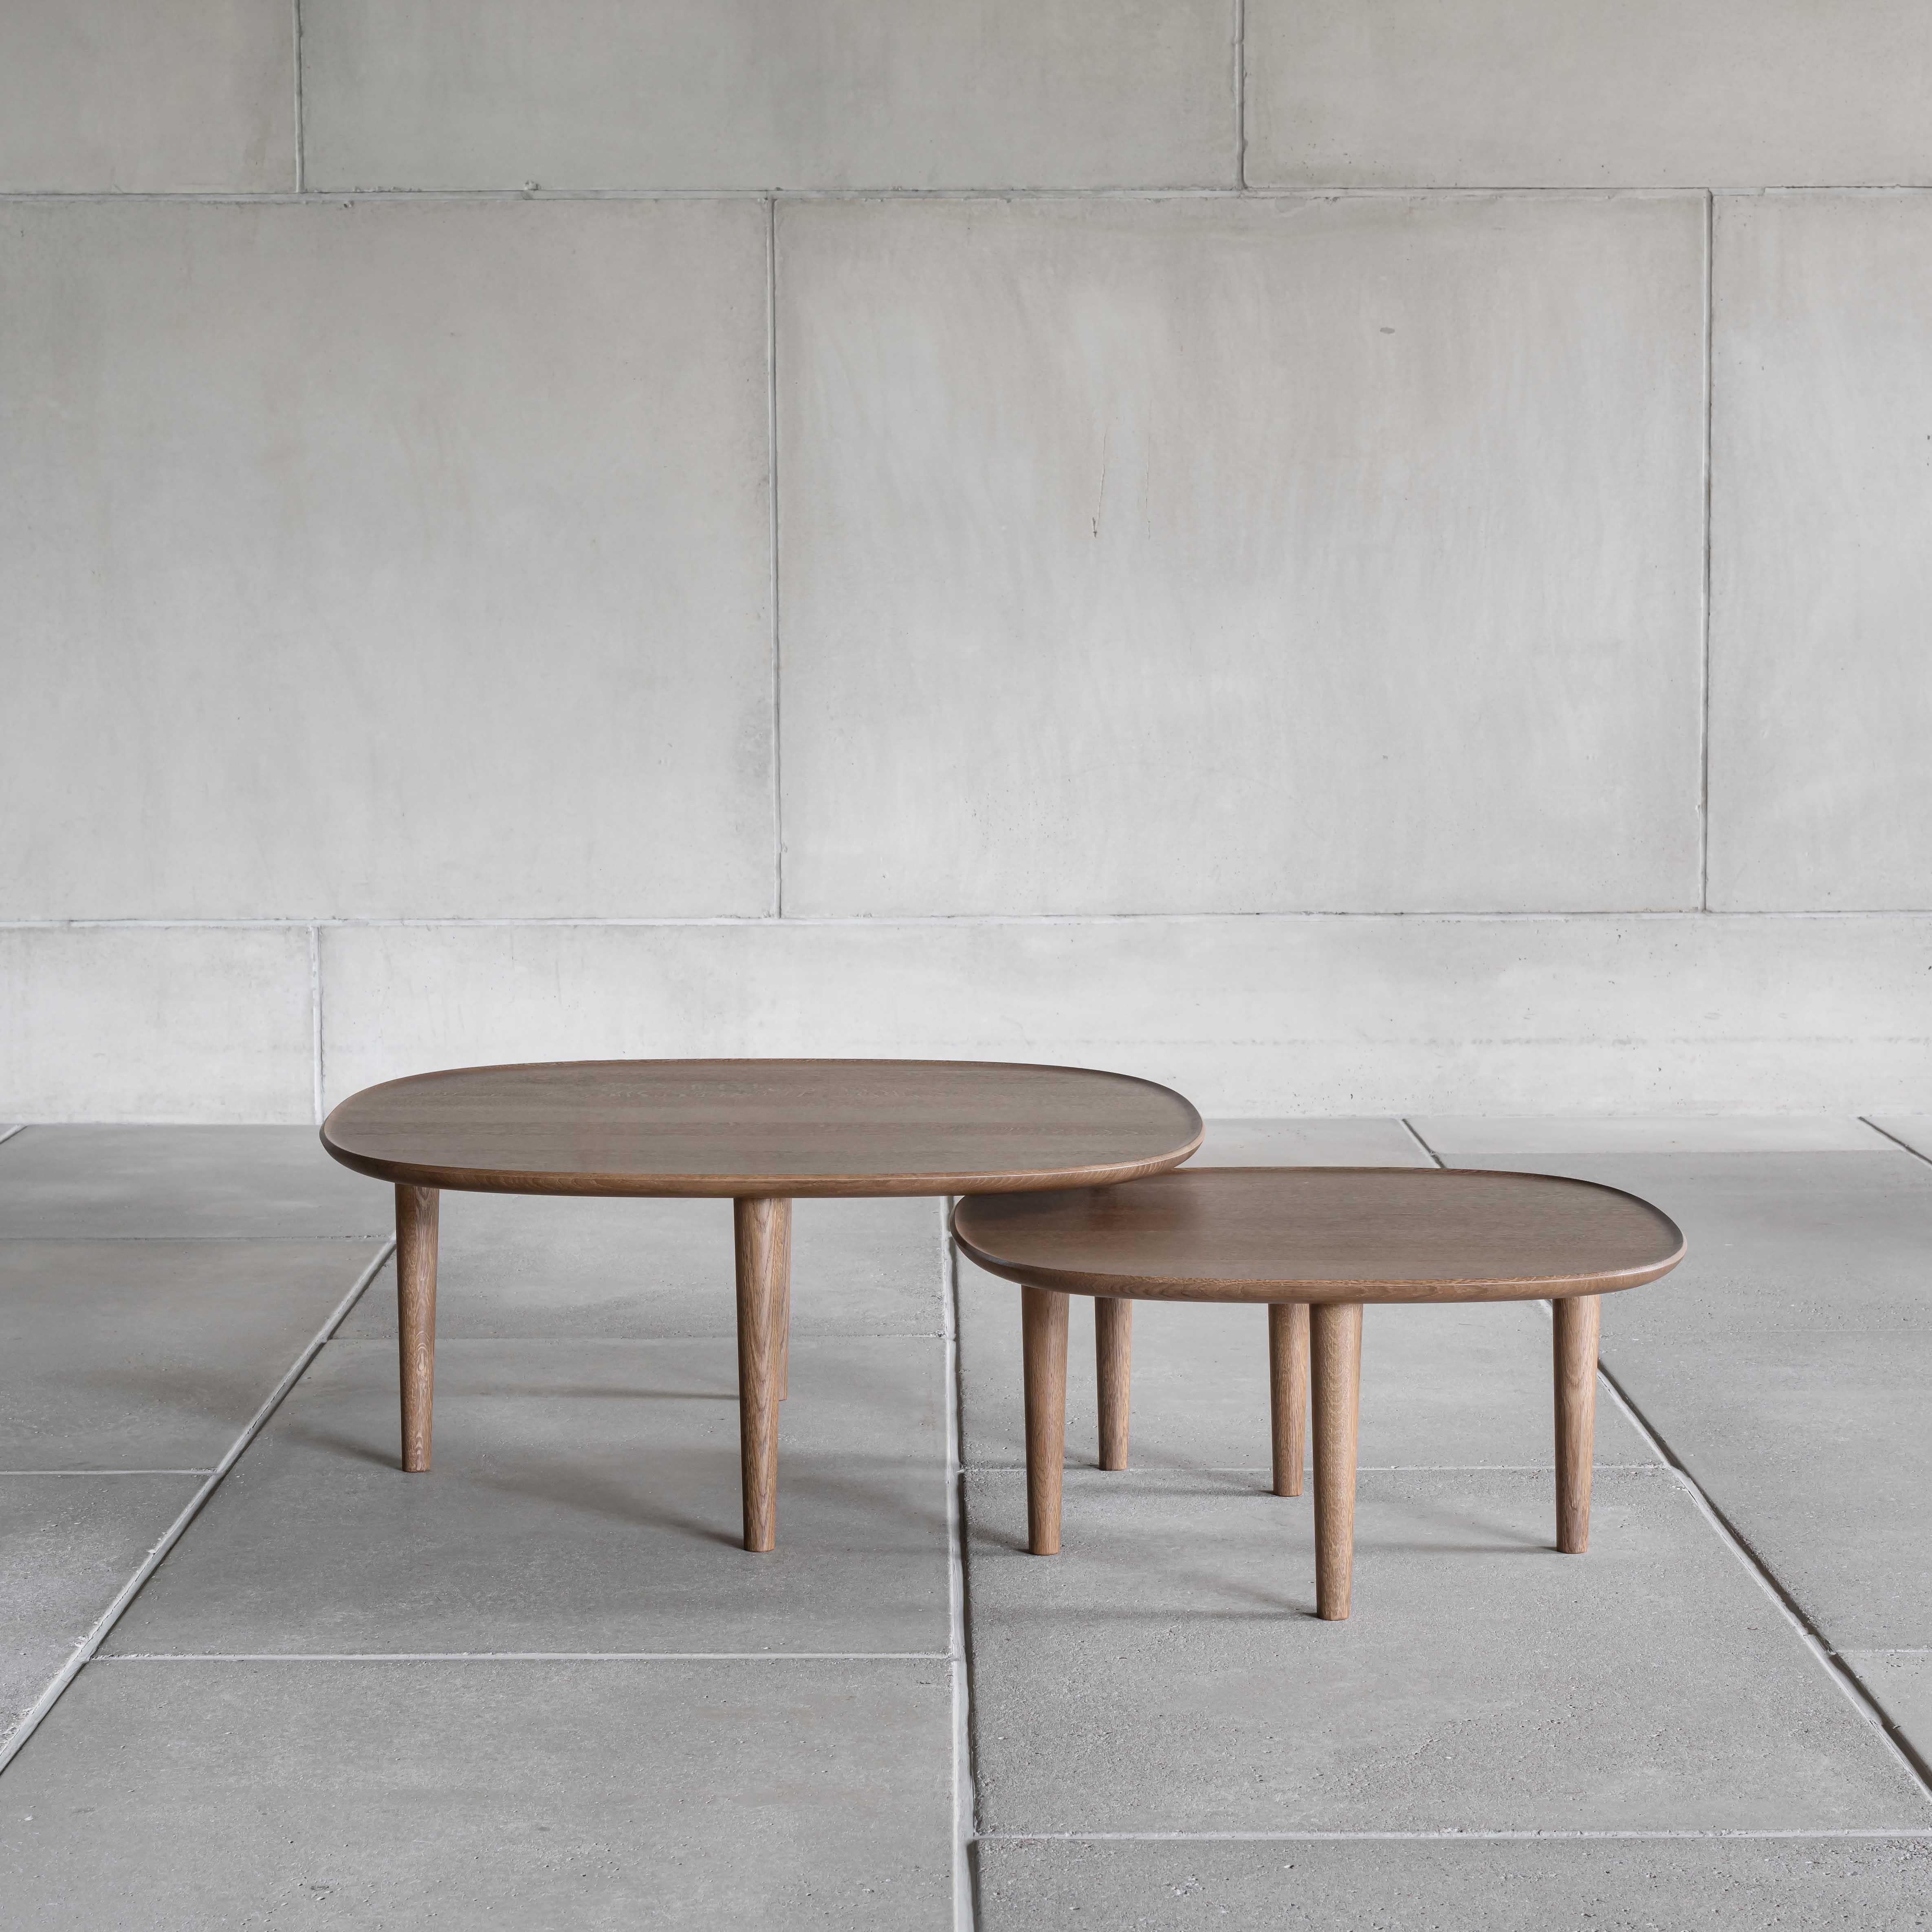 Designed by Poiat Studio’s founders Timo Mikkonen and Antti Rouhunkoski in collaboration with the master cabinet maker and designer Antrei Hartikainen, the Fiori Collection is a set of tables  and a floor sculpture. The designers’ shared idea was to